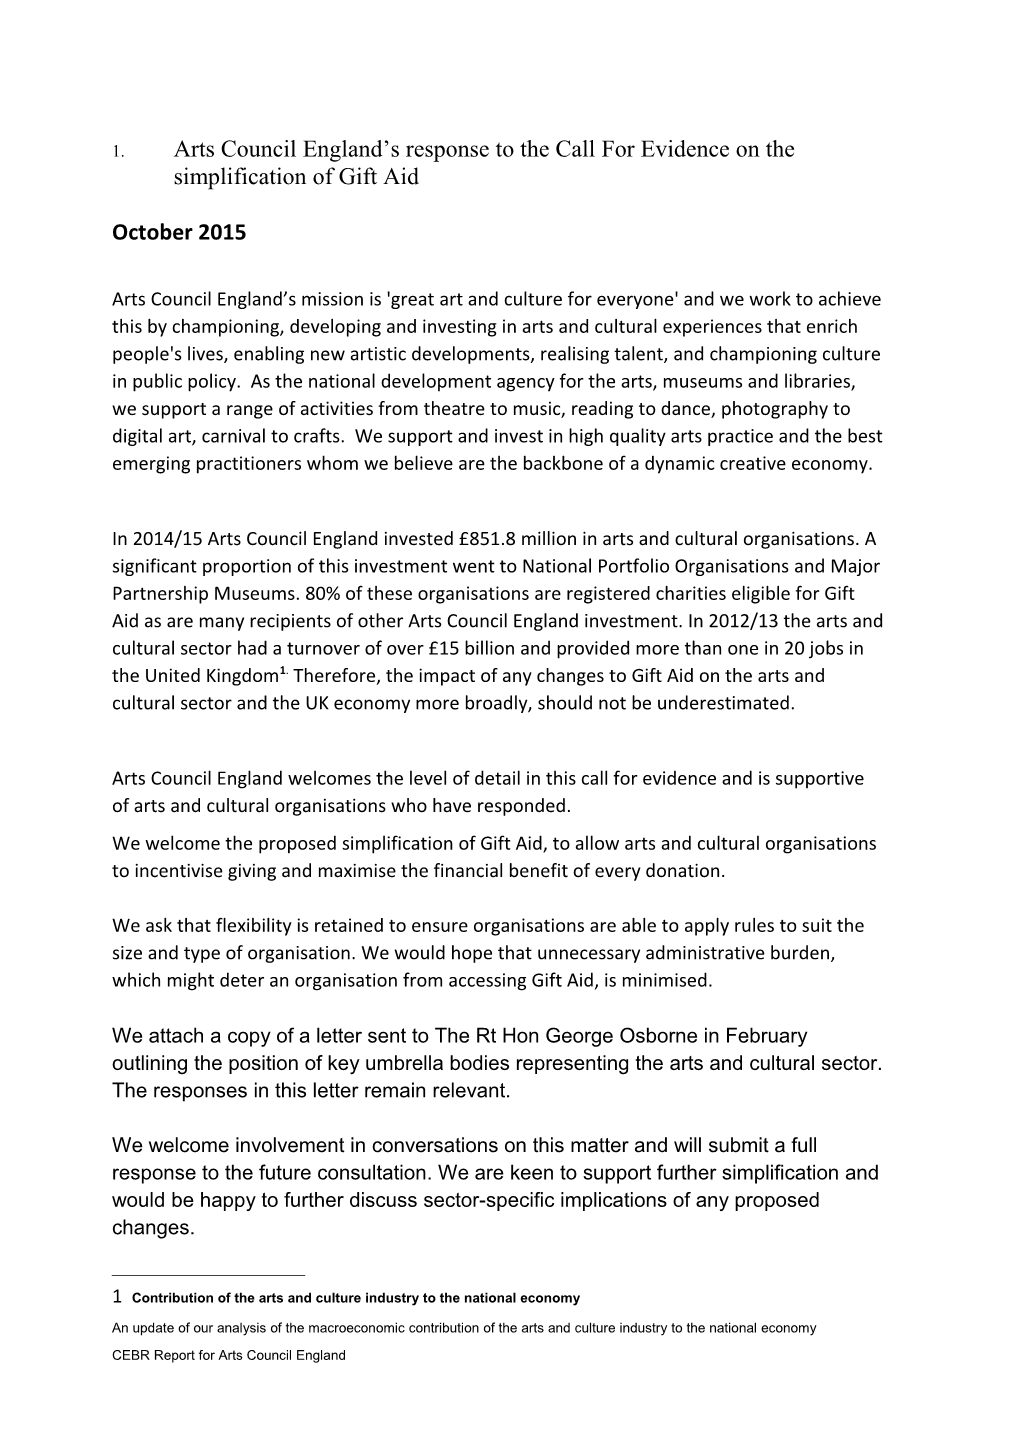 Arts Council England S Response to the Call for Evidenceon the Simplification of Gift Aid